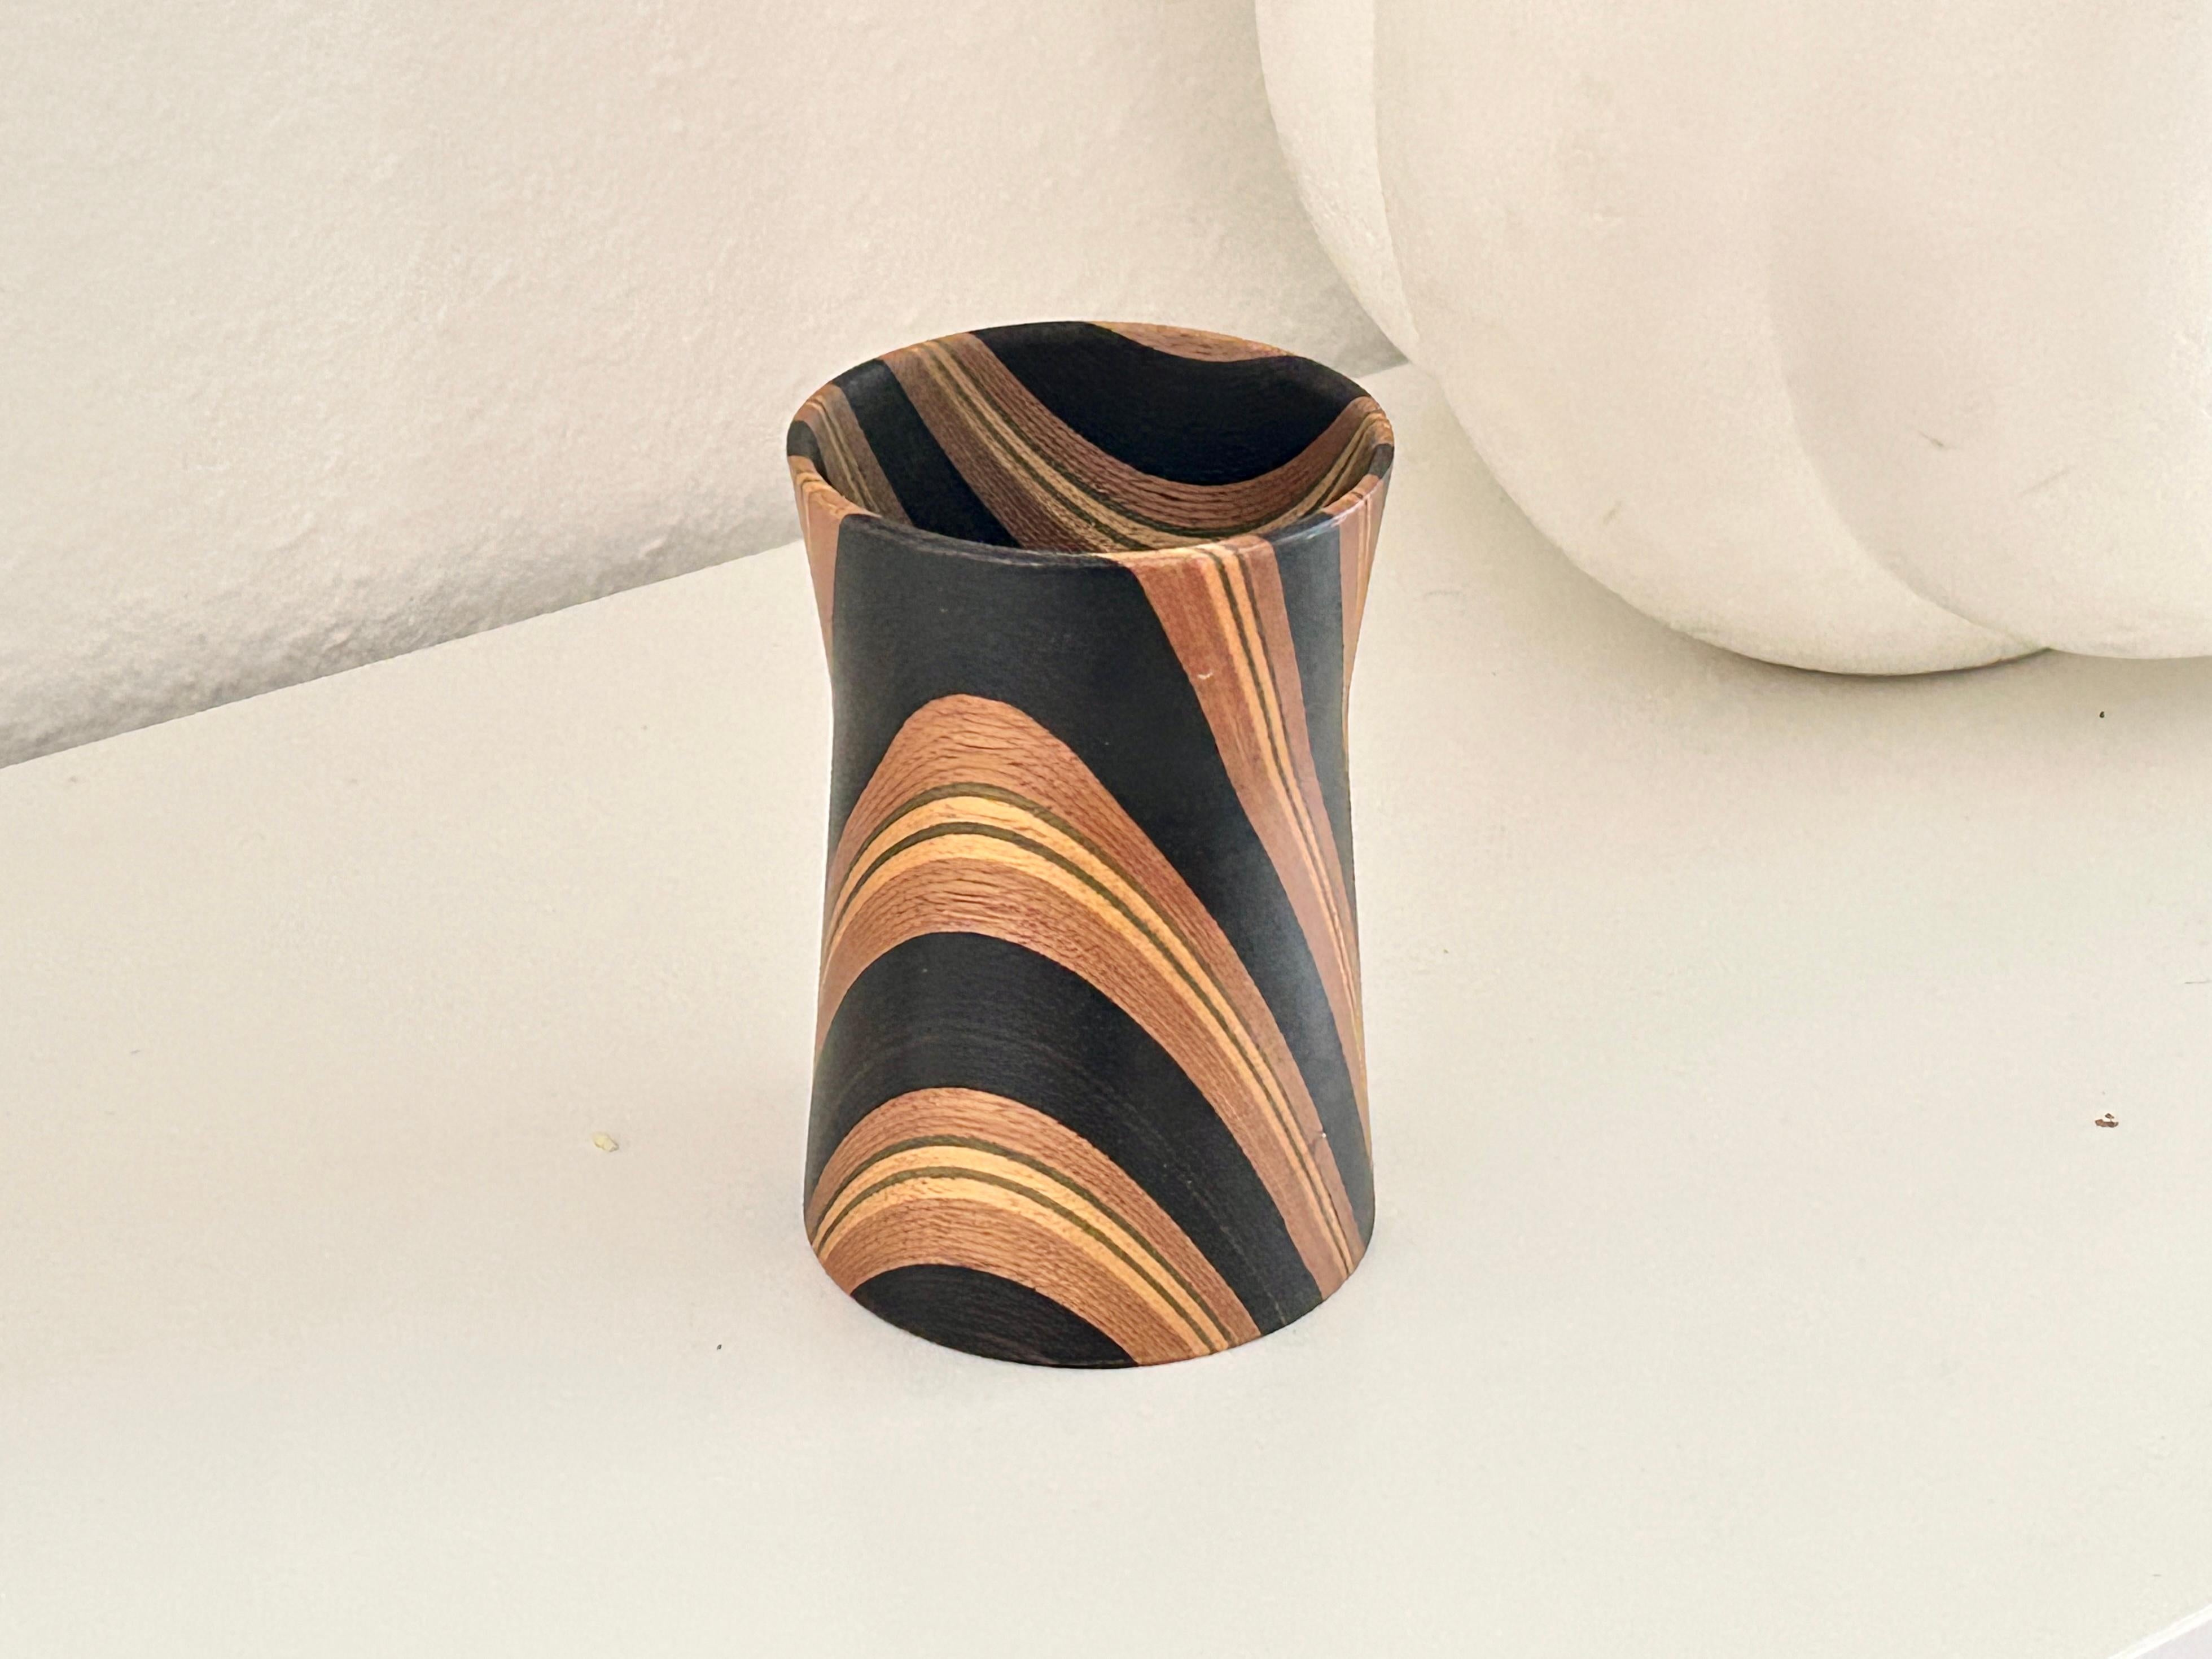 Unique wooden color-wood vase designed by Angelo Mangiarotti, ca. 1981, 

with creator mark on bottom: „Alpimass“, „A. Mangiarotti“

Exceptionally rare vase from a series that Angelo Mangiarotti designed for Alpi, Italy. 
Alpi was the first company